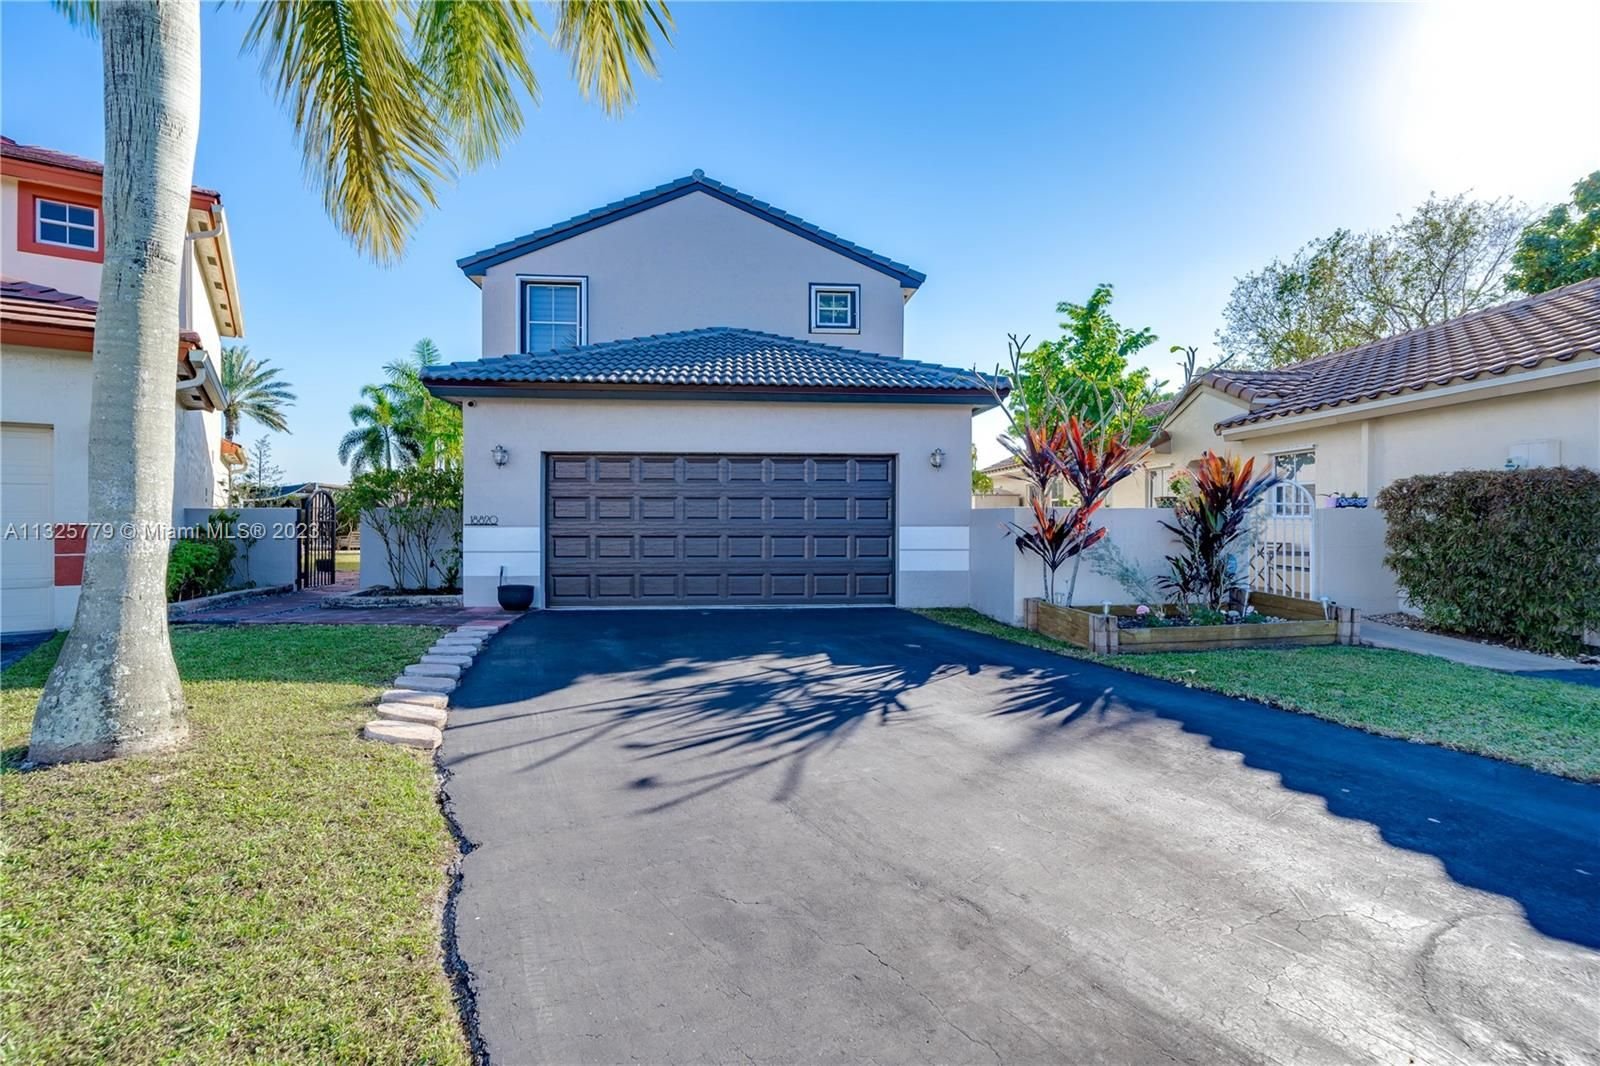 Real estate property located at 18820 19th St, Broward County, Pembroke Pines, FL